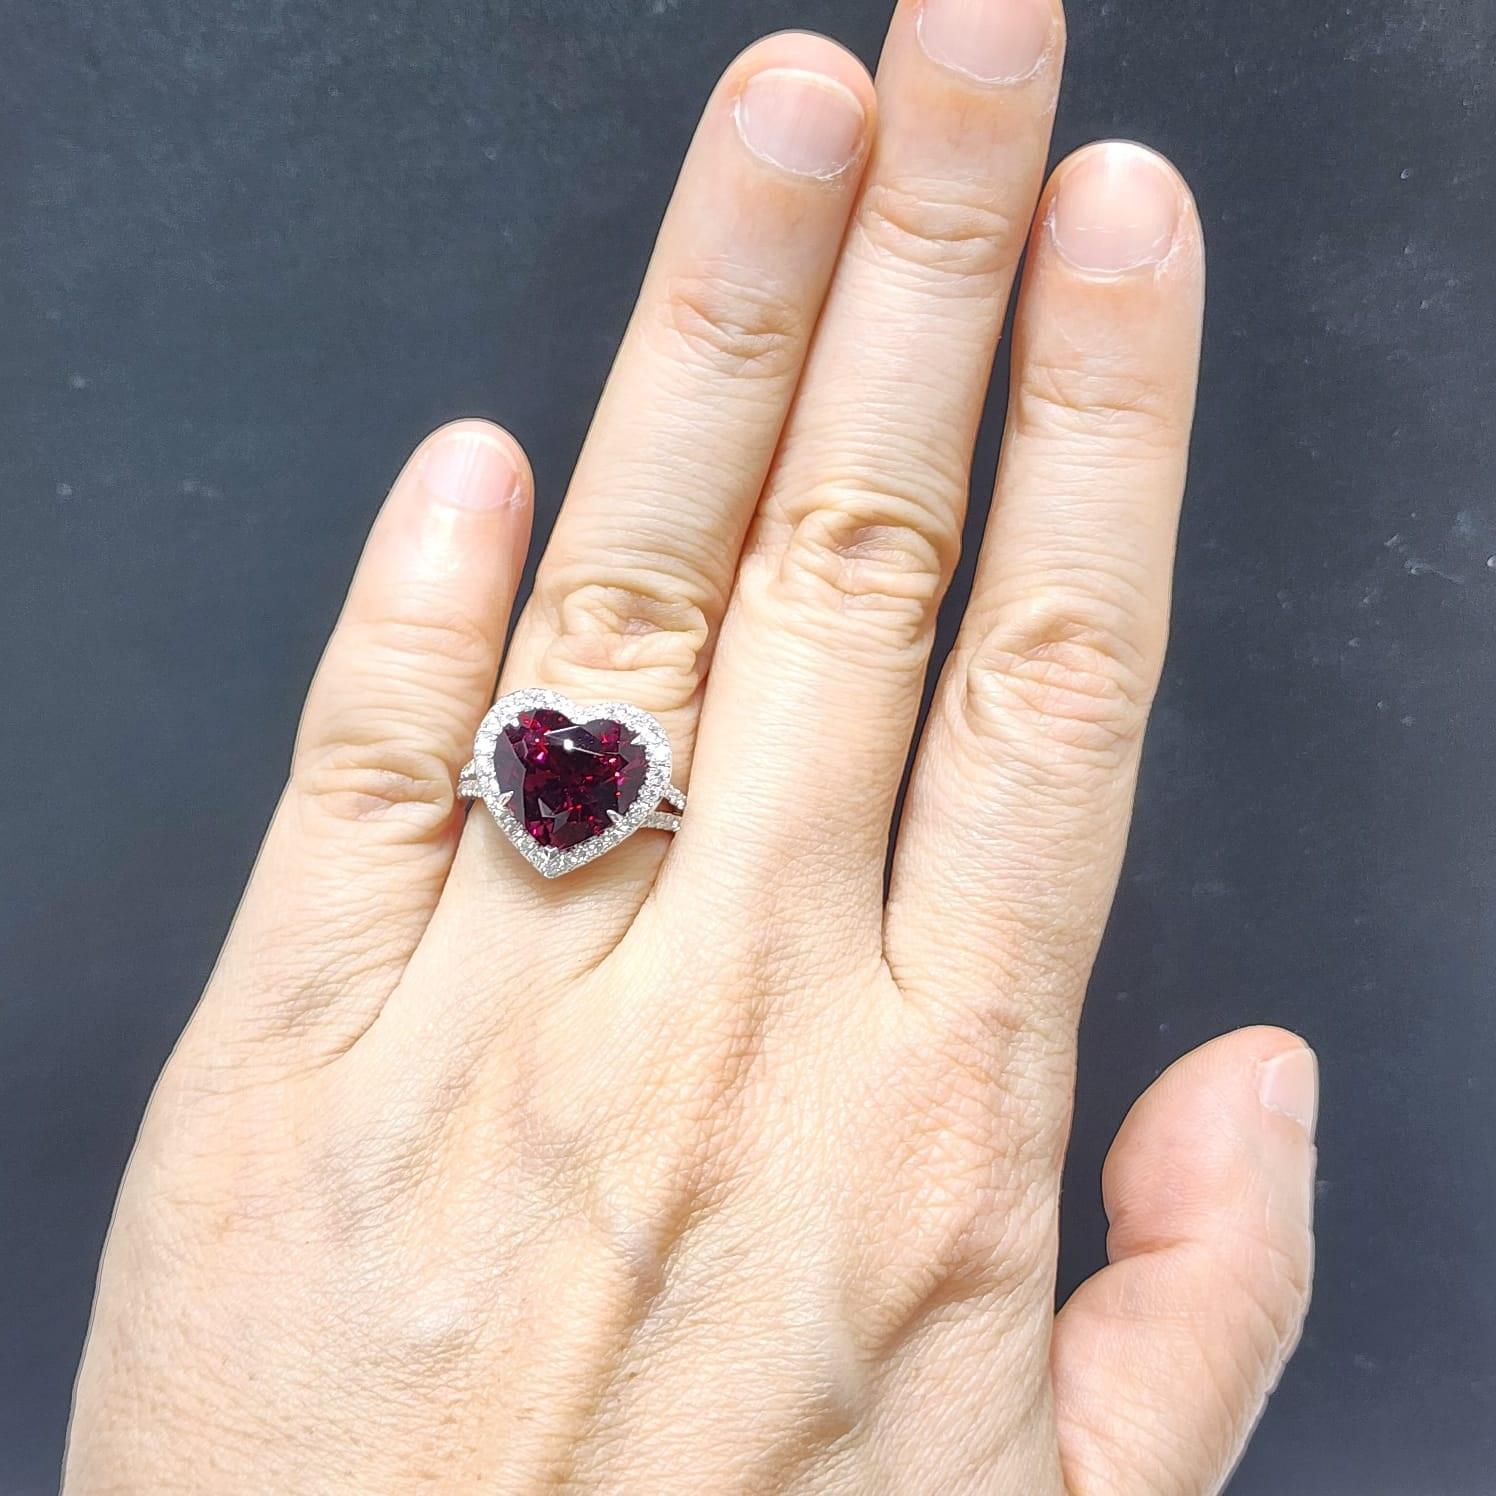 GIA Certified 7.37 Carat Heart Garnet and Diamond Ring in 18K White Gold For Sale 1